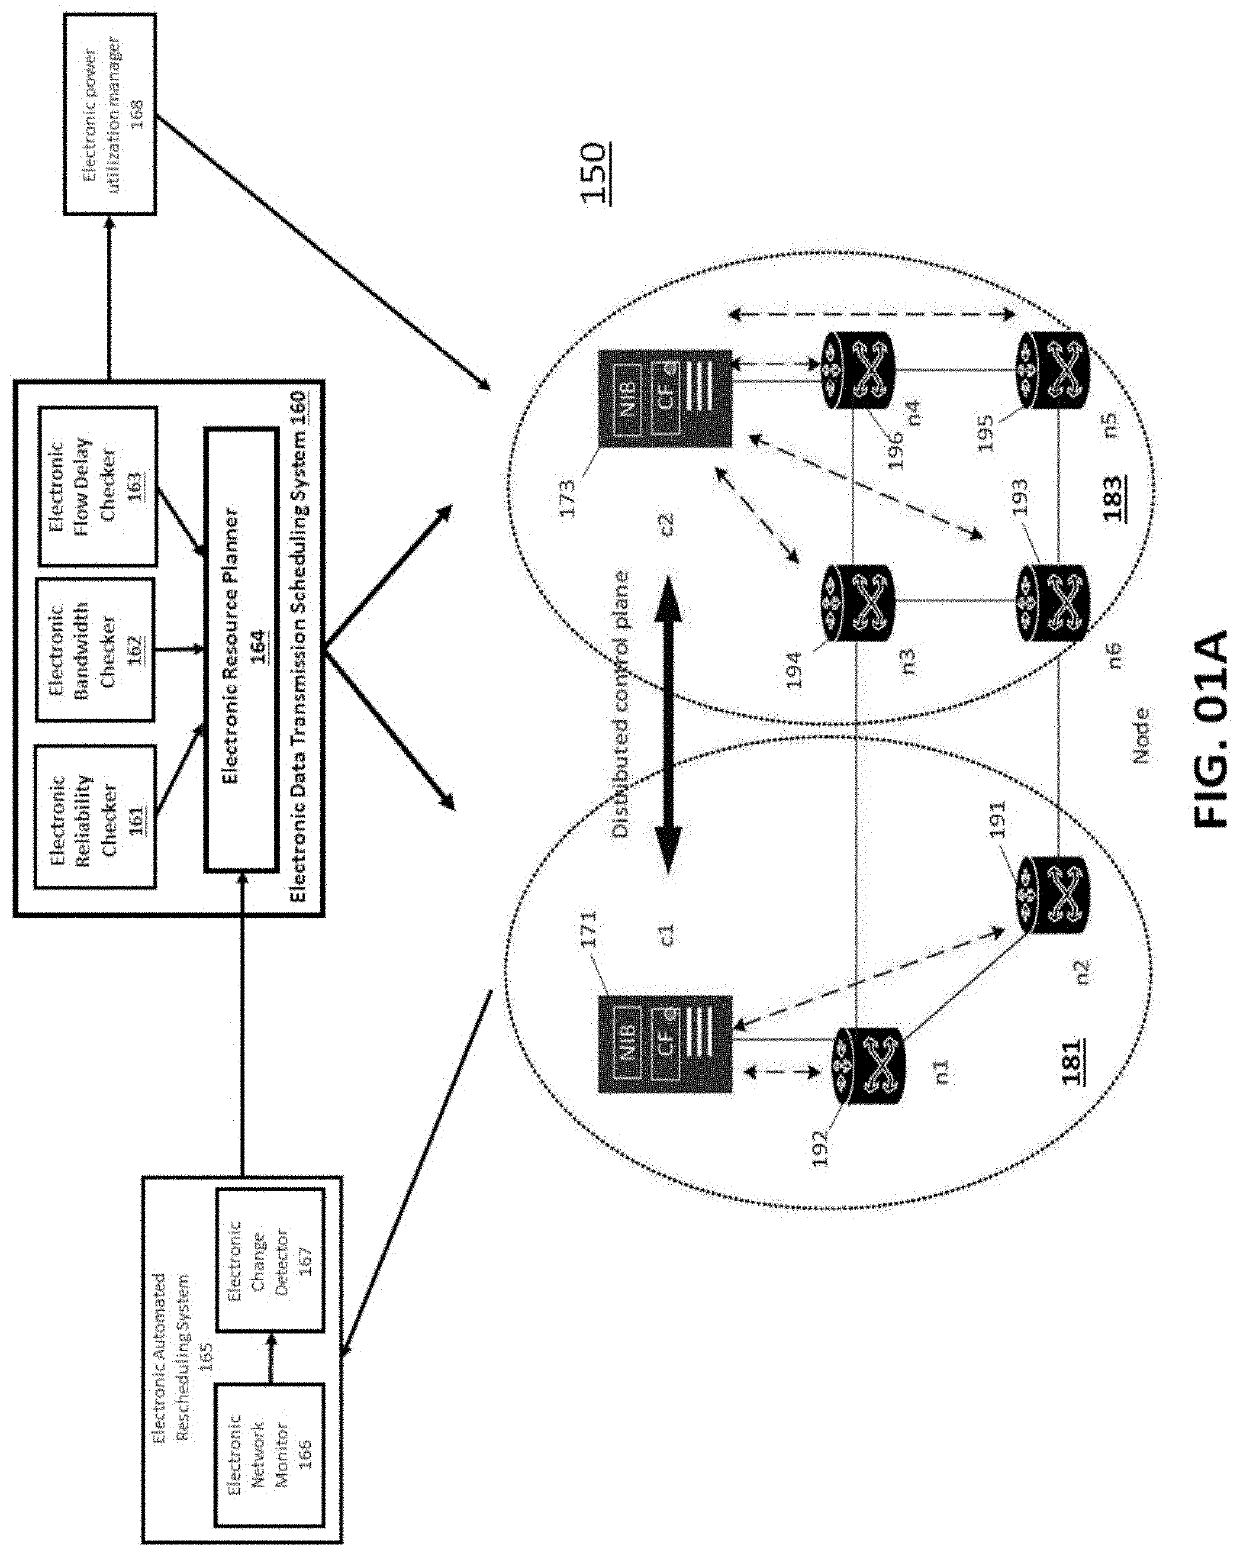 Dynamic Deployment of Network Applications Having Performance and Reliability Guarantees in Large Computing Networks